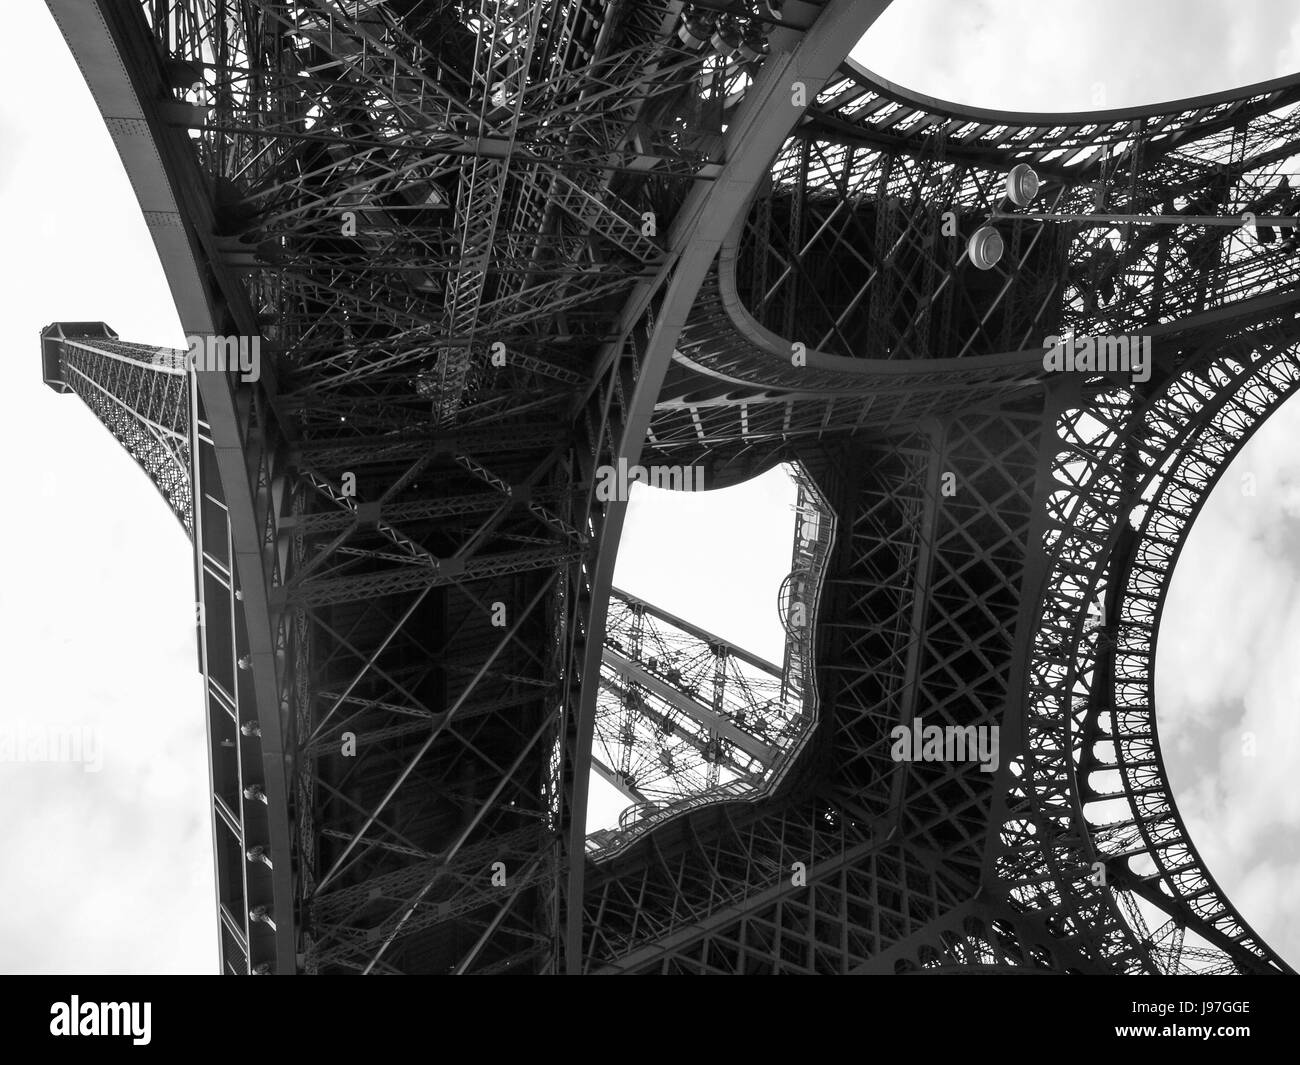 Eiffel tower, Paris, France from underneath, and shot in black and white. Stock Photo